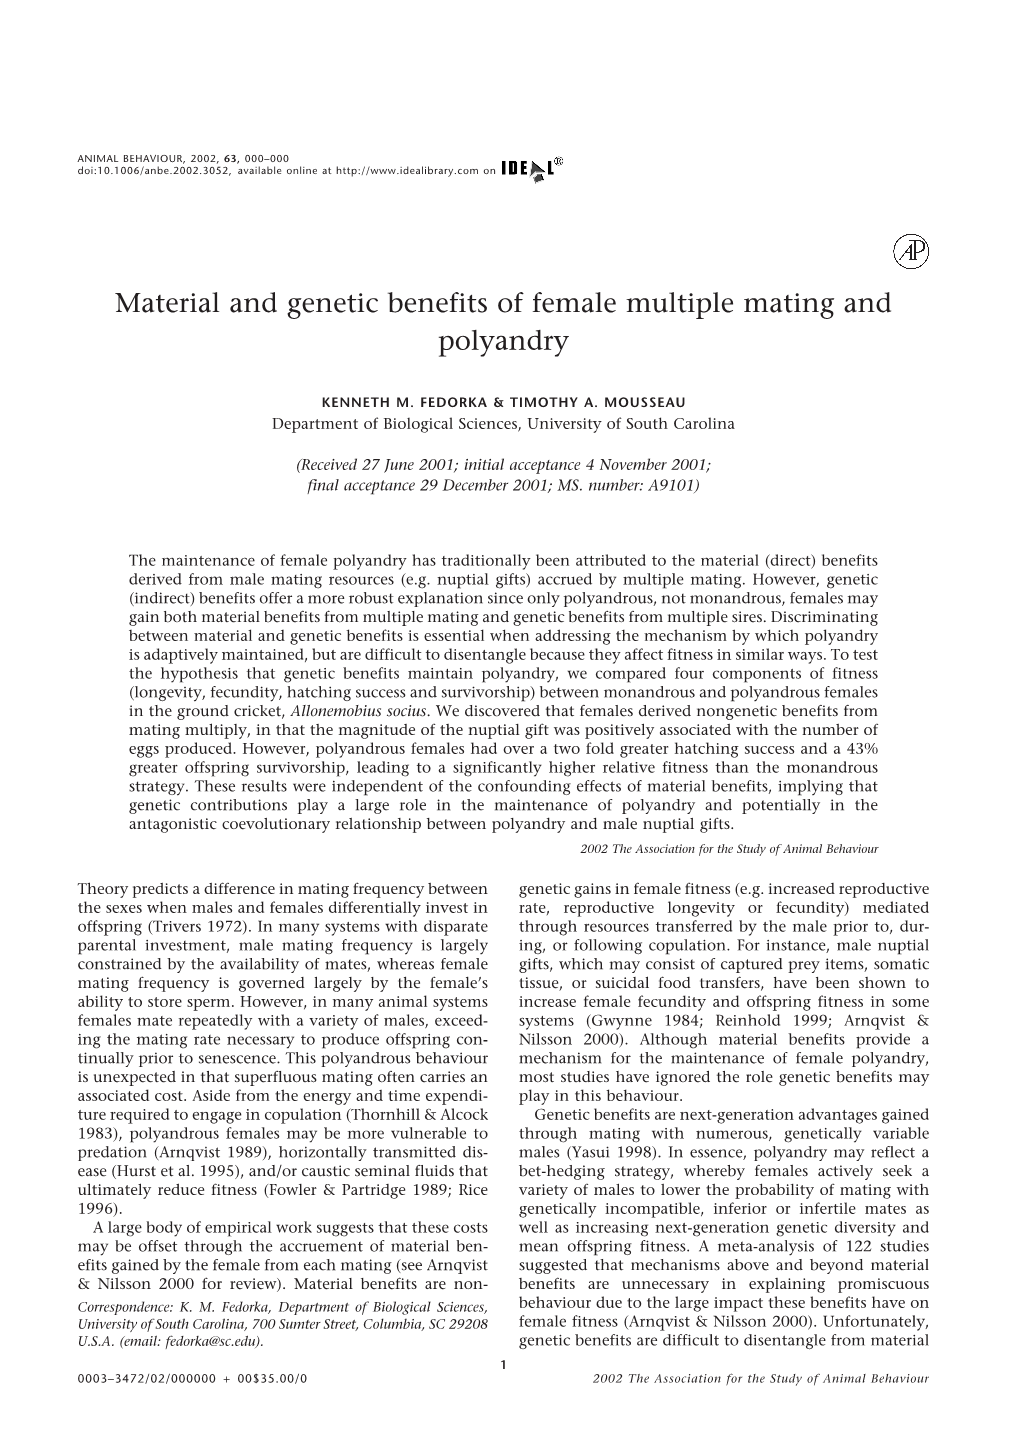 Material and Genetic Benefits of Female Multiple Mating and Polyandry